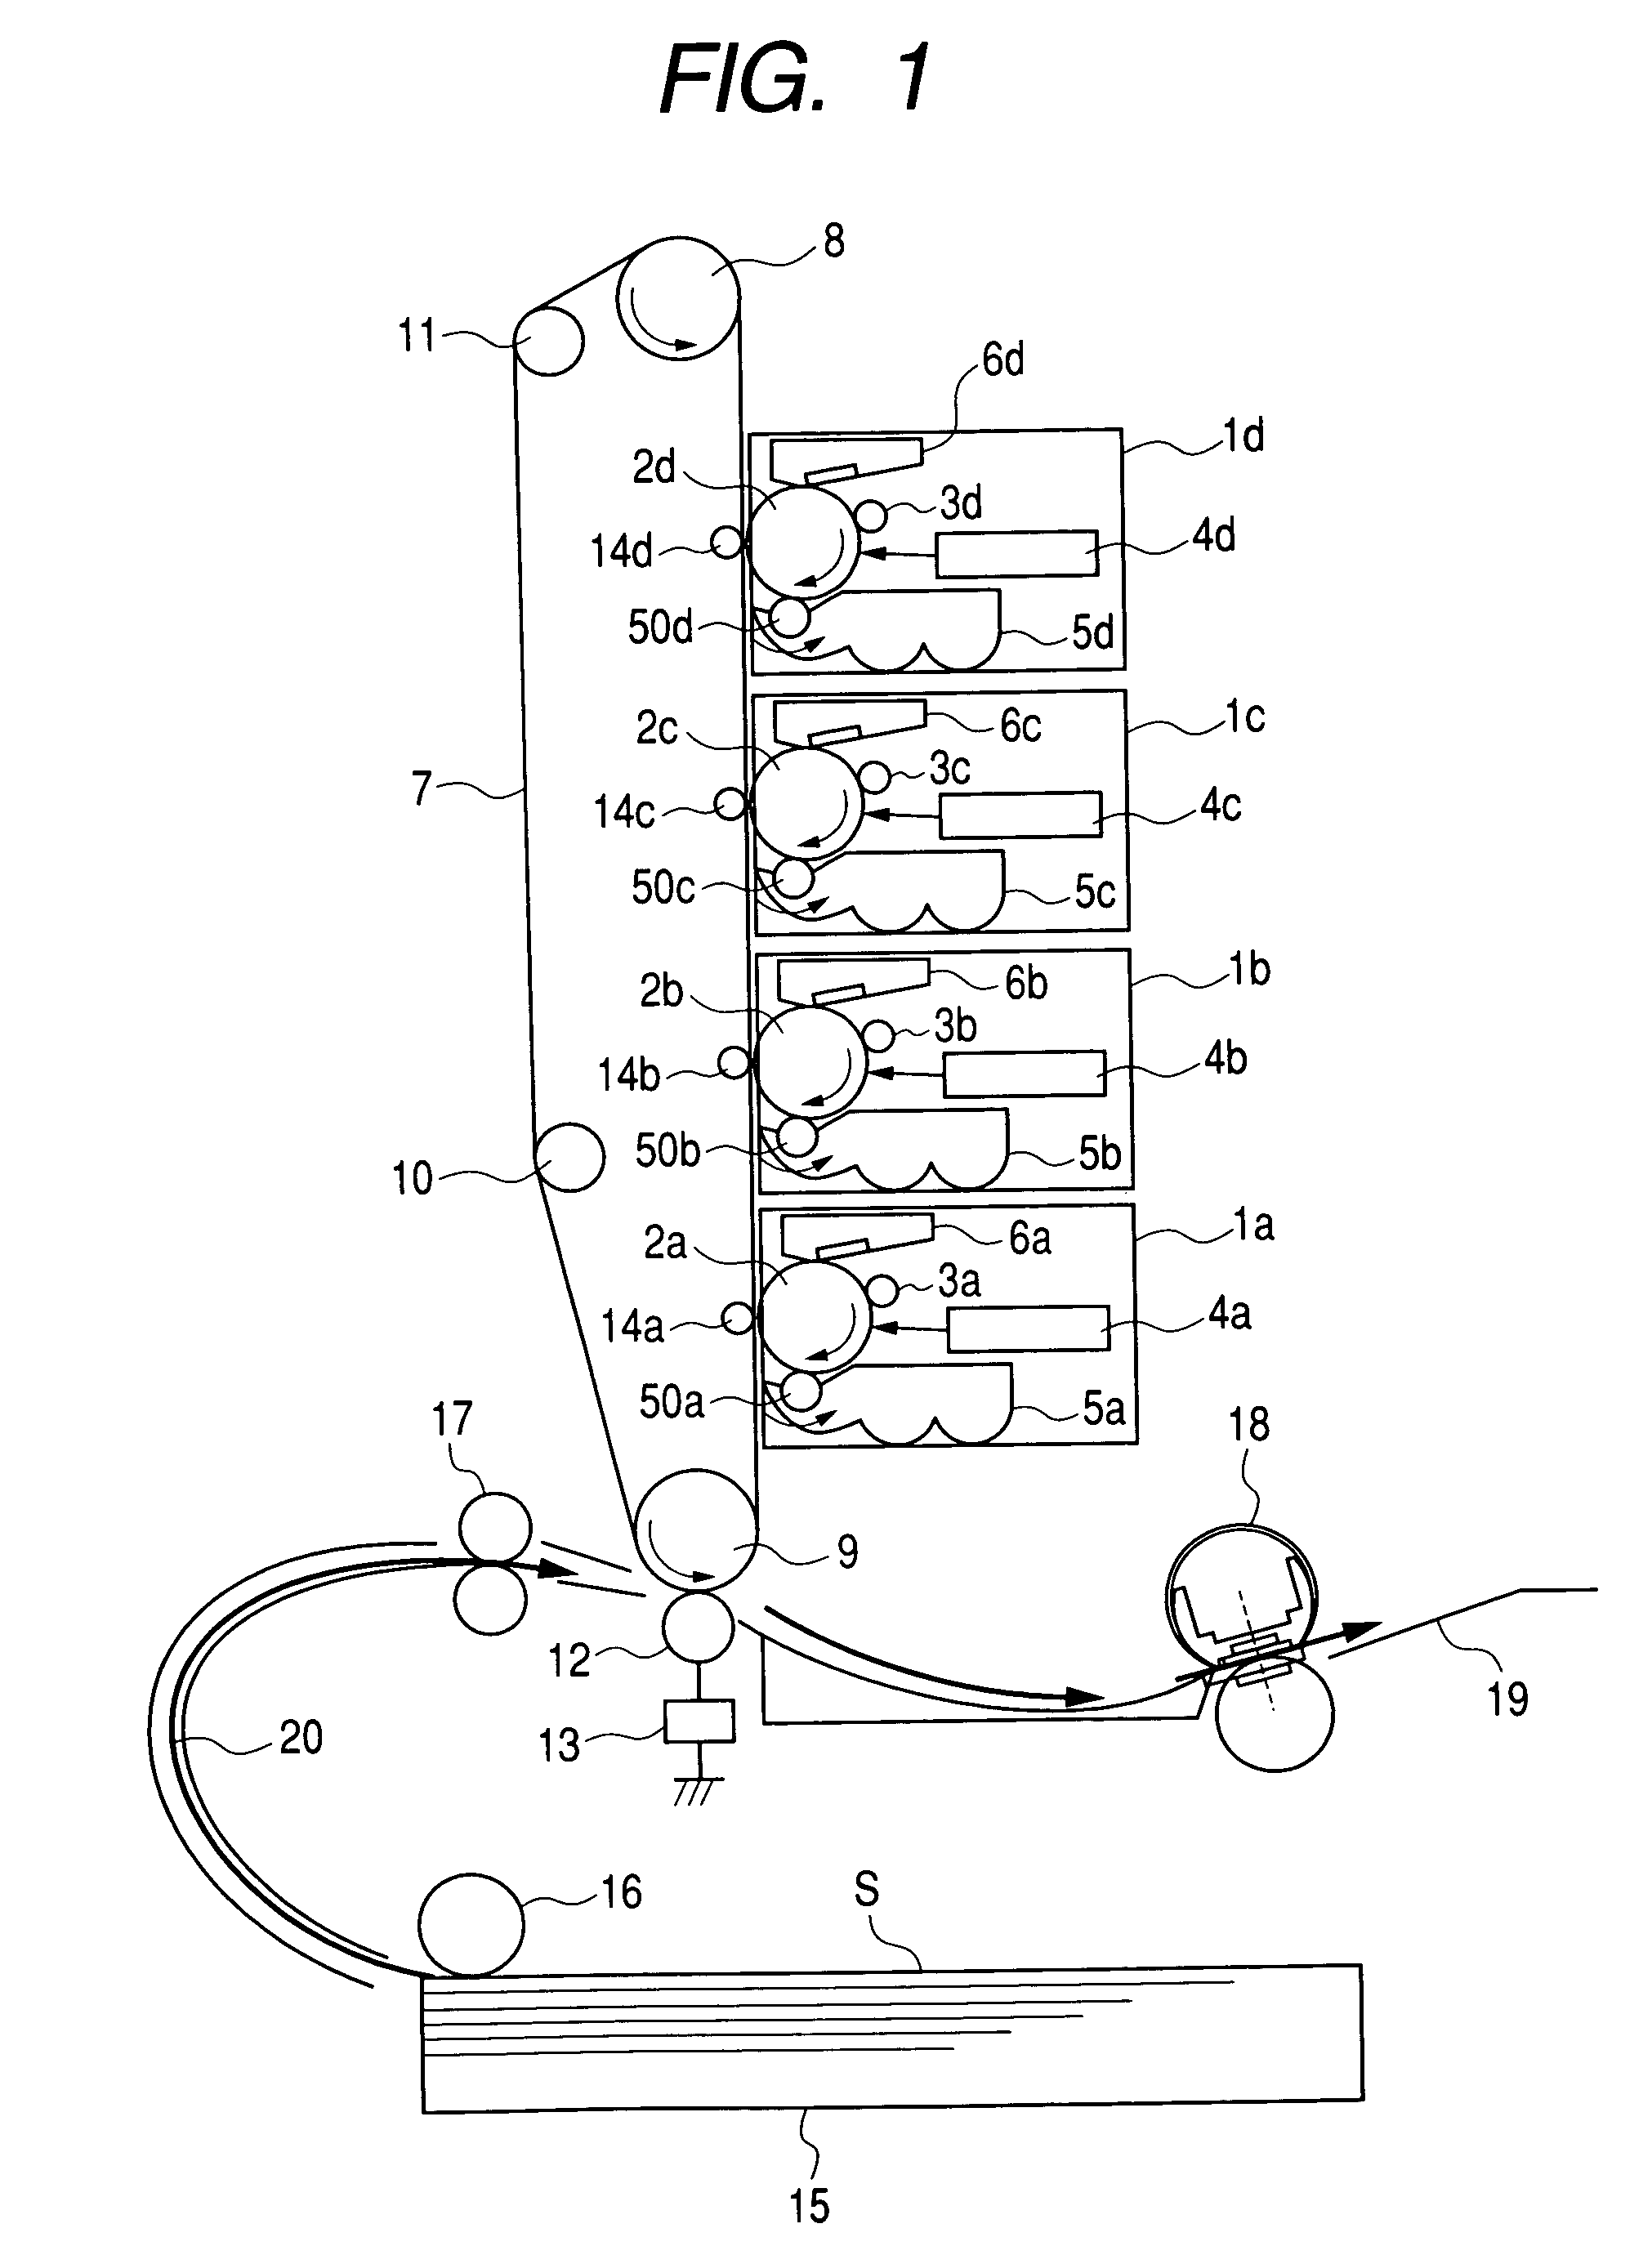 Image heating apparatus including rotary member with metal layer